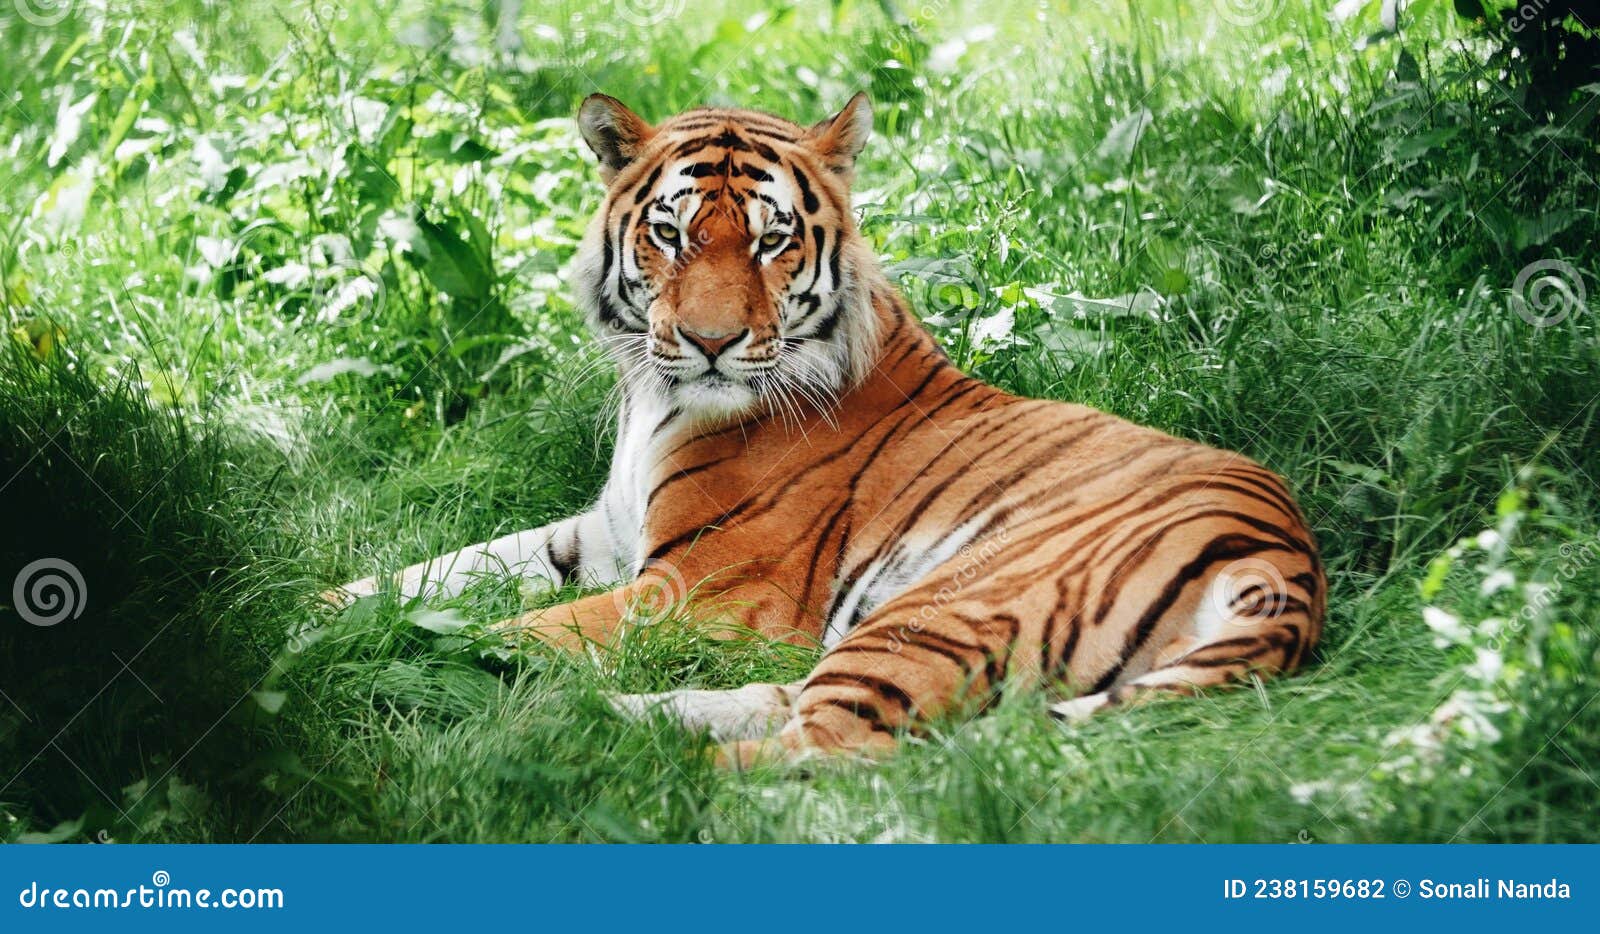 Tiger image in forest stock photo. Image of background - 238159682